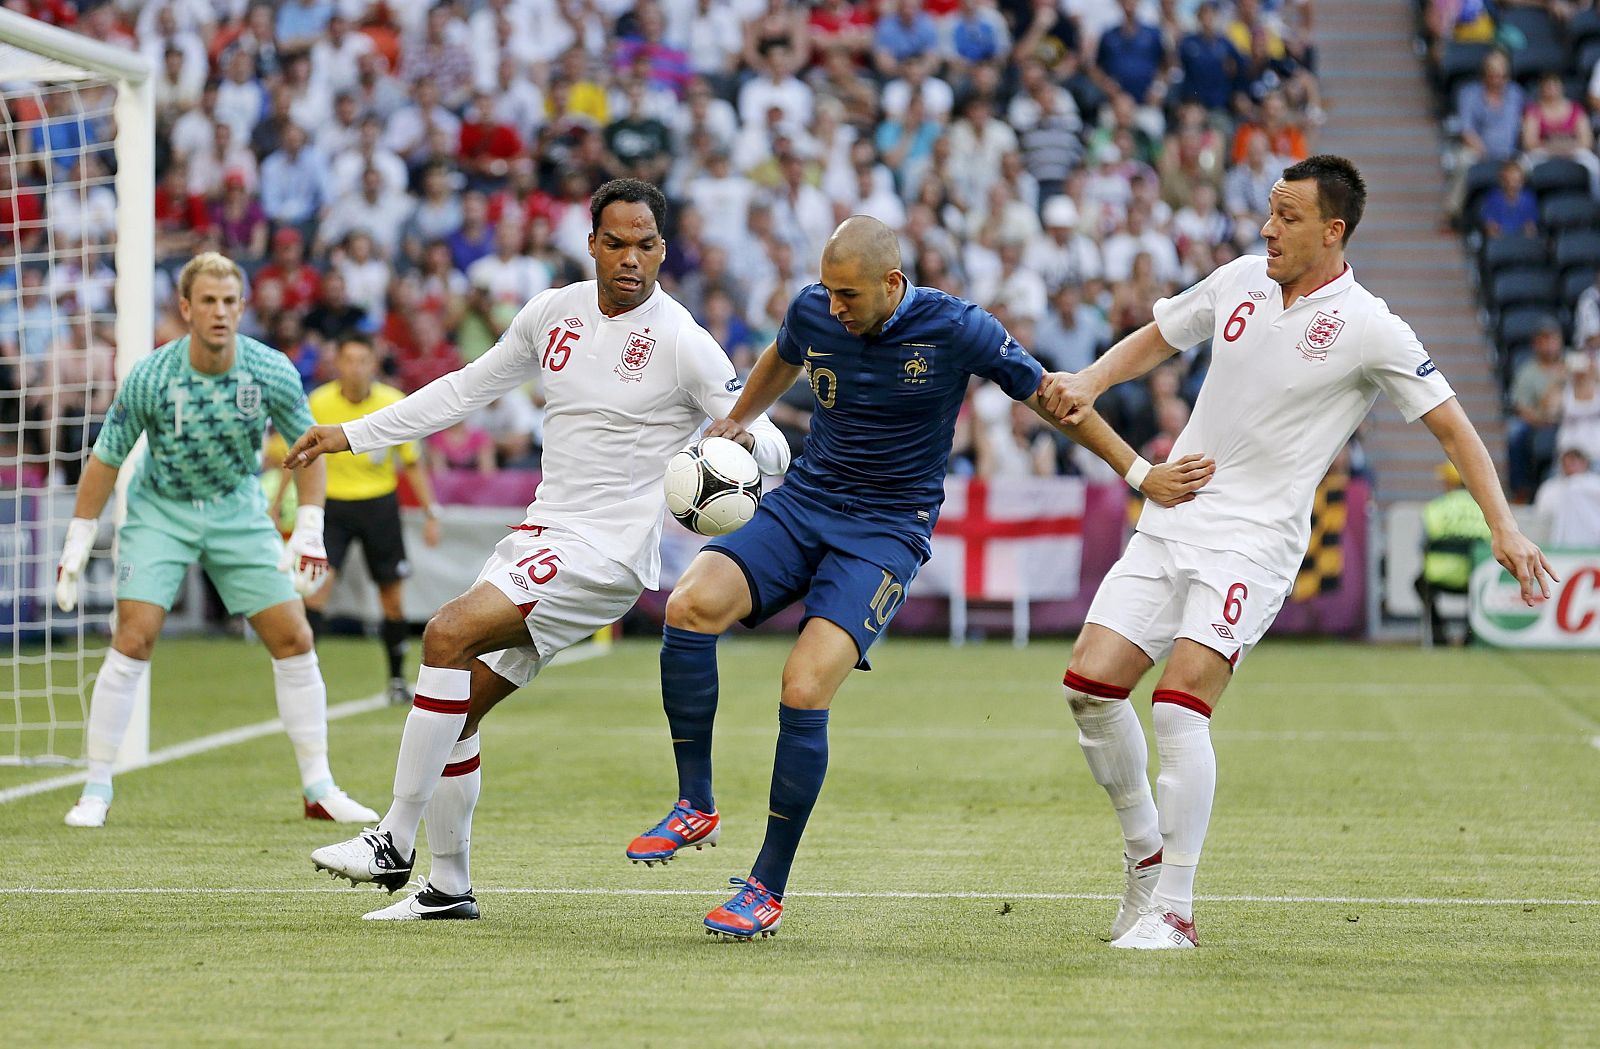 France's Benzema controls the ball next to England's Lescott and Terry during the Group D Euro 2012 soccer match against France at Donbass Arena in Donetsk